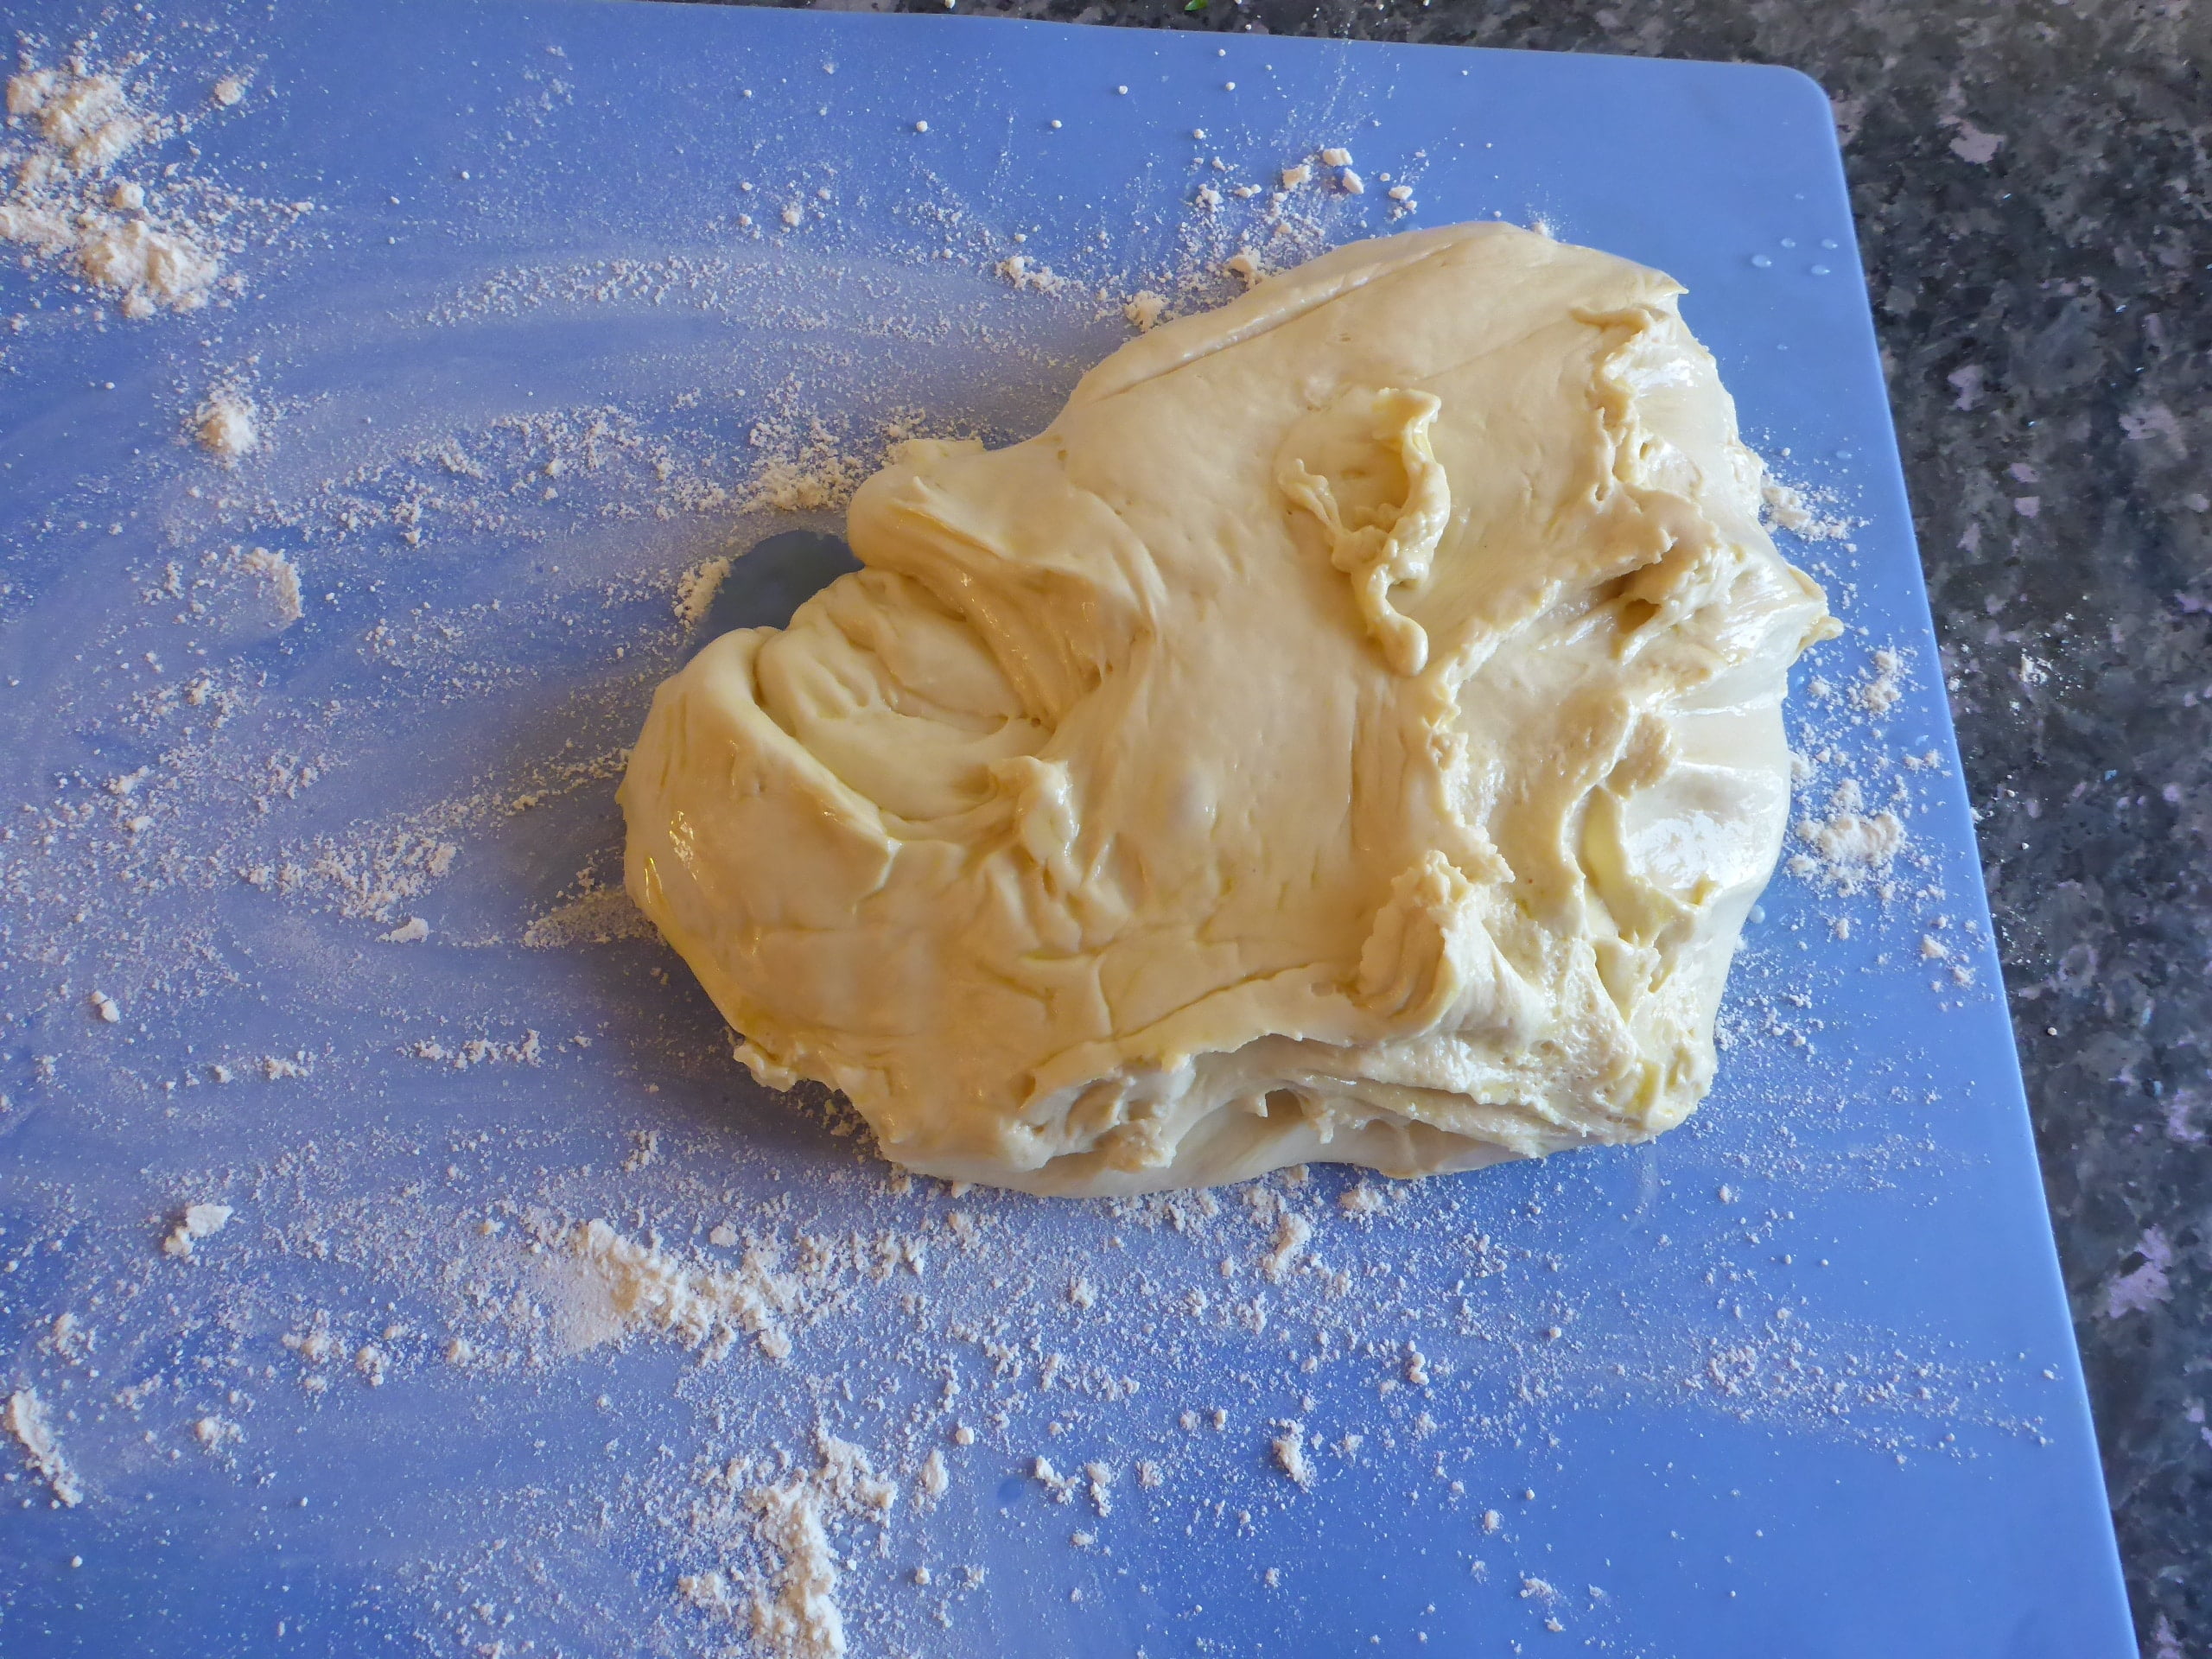 Yeast dough transferred on a cutting board after the first rise.